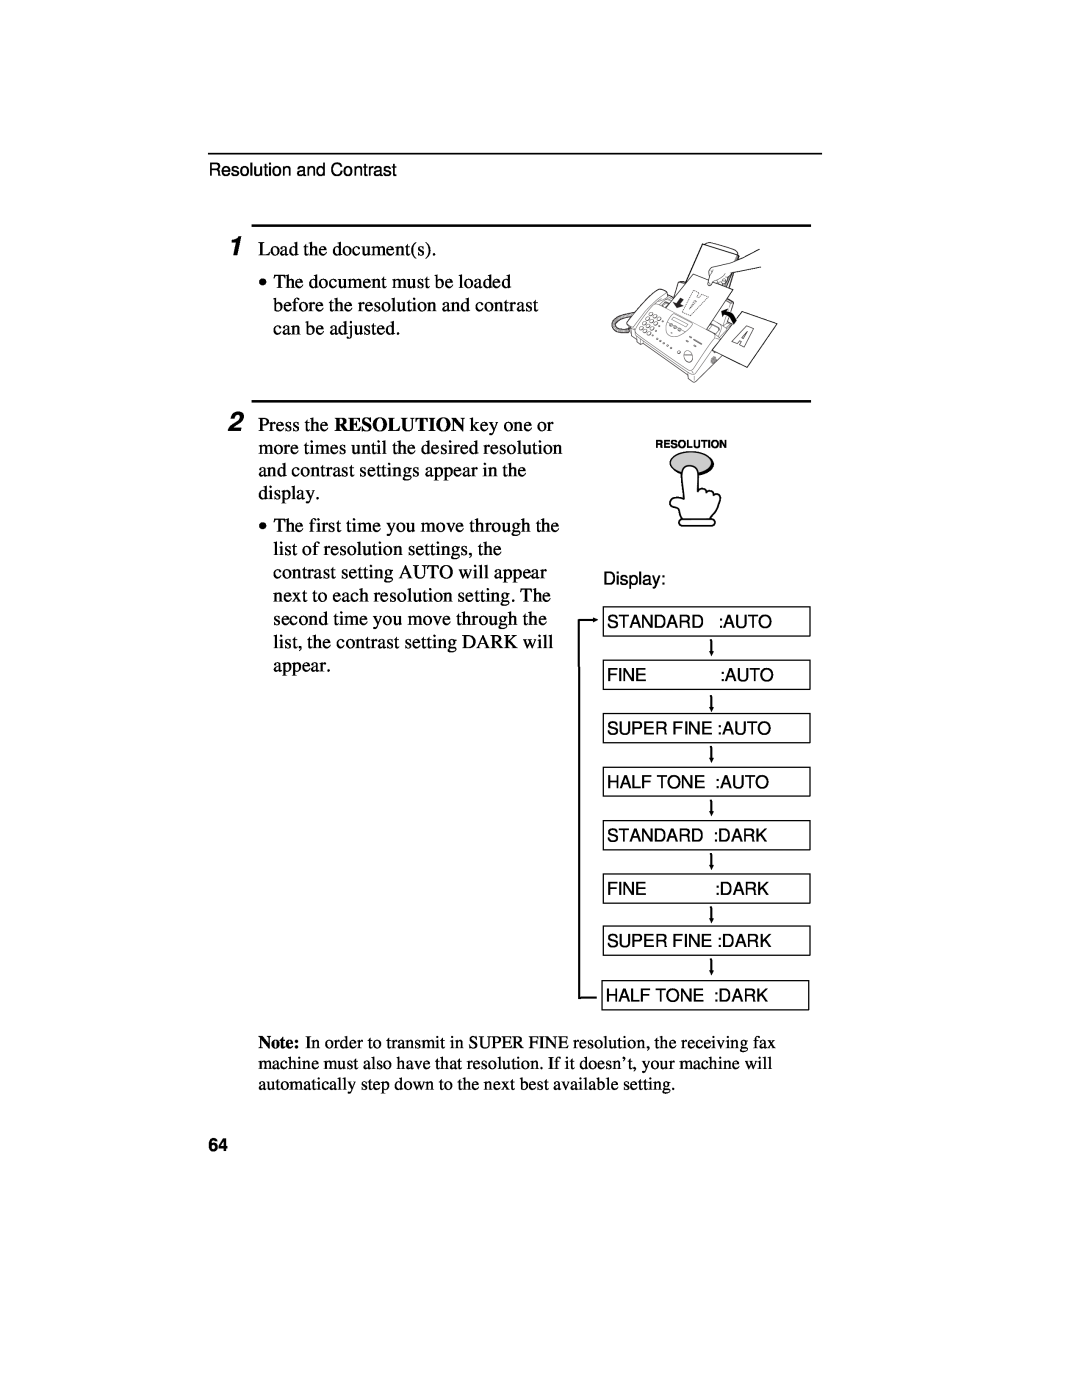 Sharp UX-460 operation manual Load the documents 